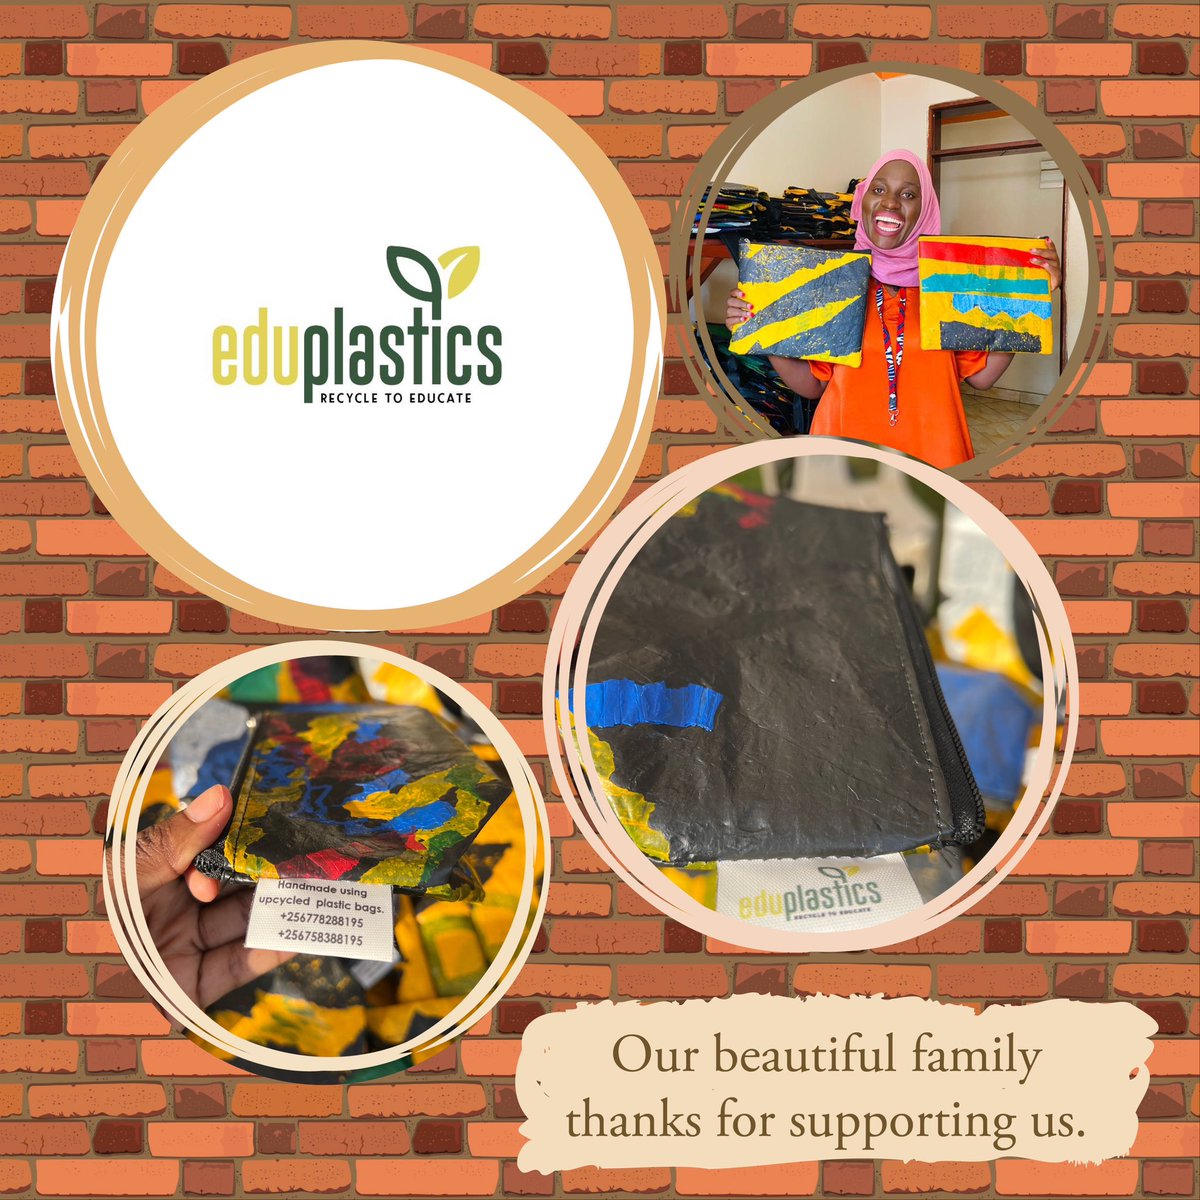 As we move towards our one-year anniversary in operations, thanks to everyone who has helped build the Edu-plastics brand.

#Eduplastics #PlasticRecycling #PracticalEducation #UndserservedCommunities #BrandBuilding #AnniversaryYear